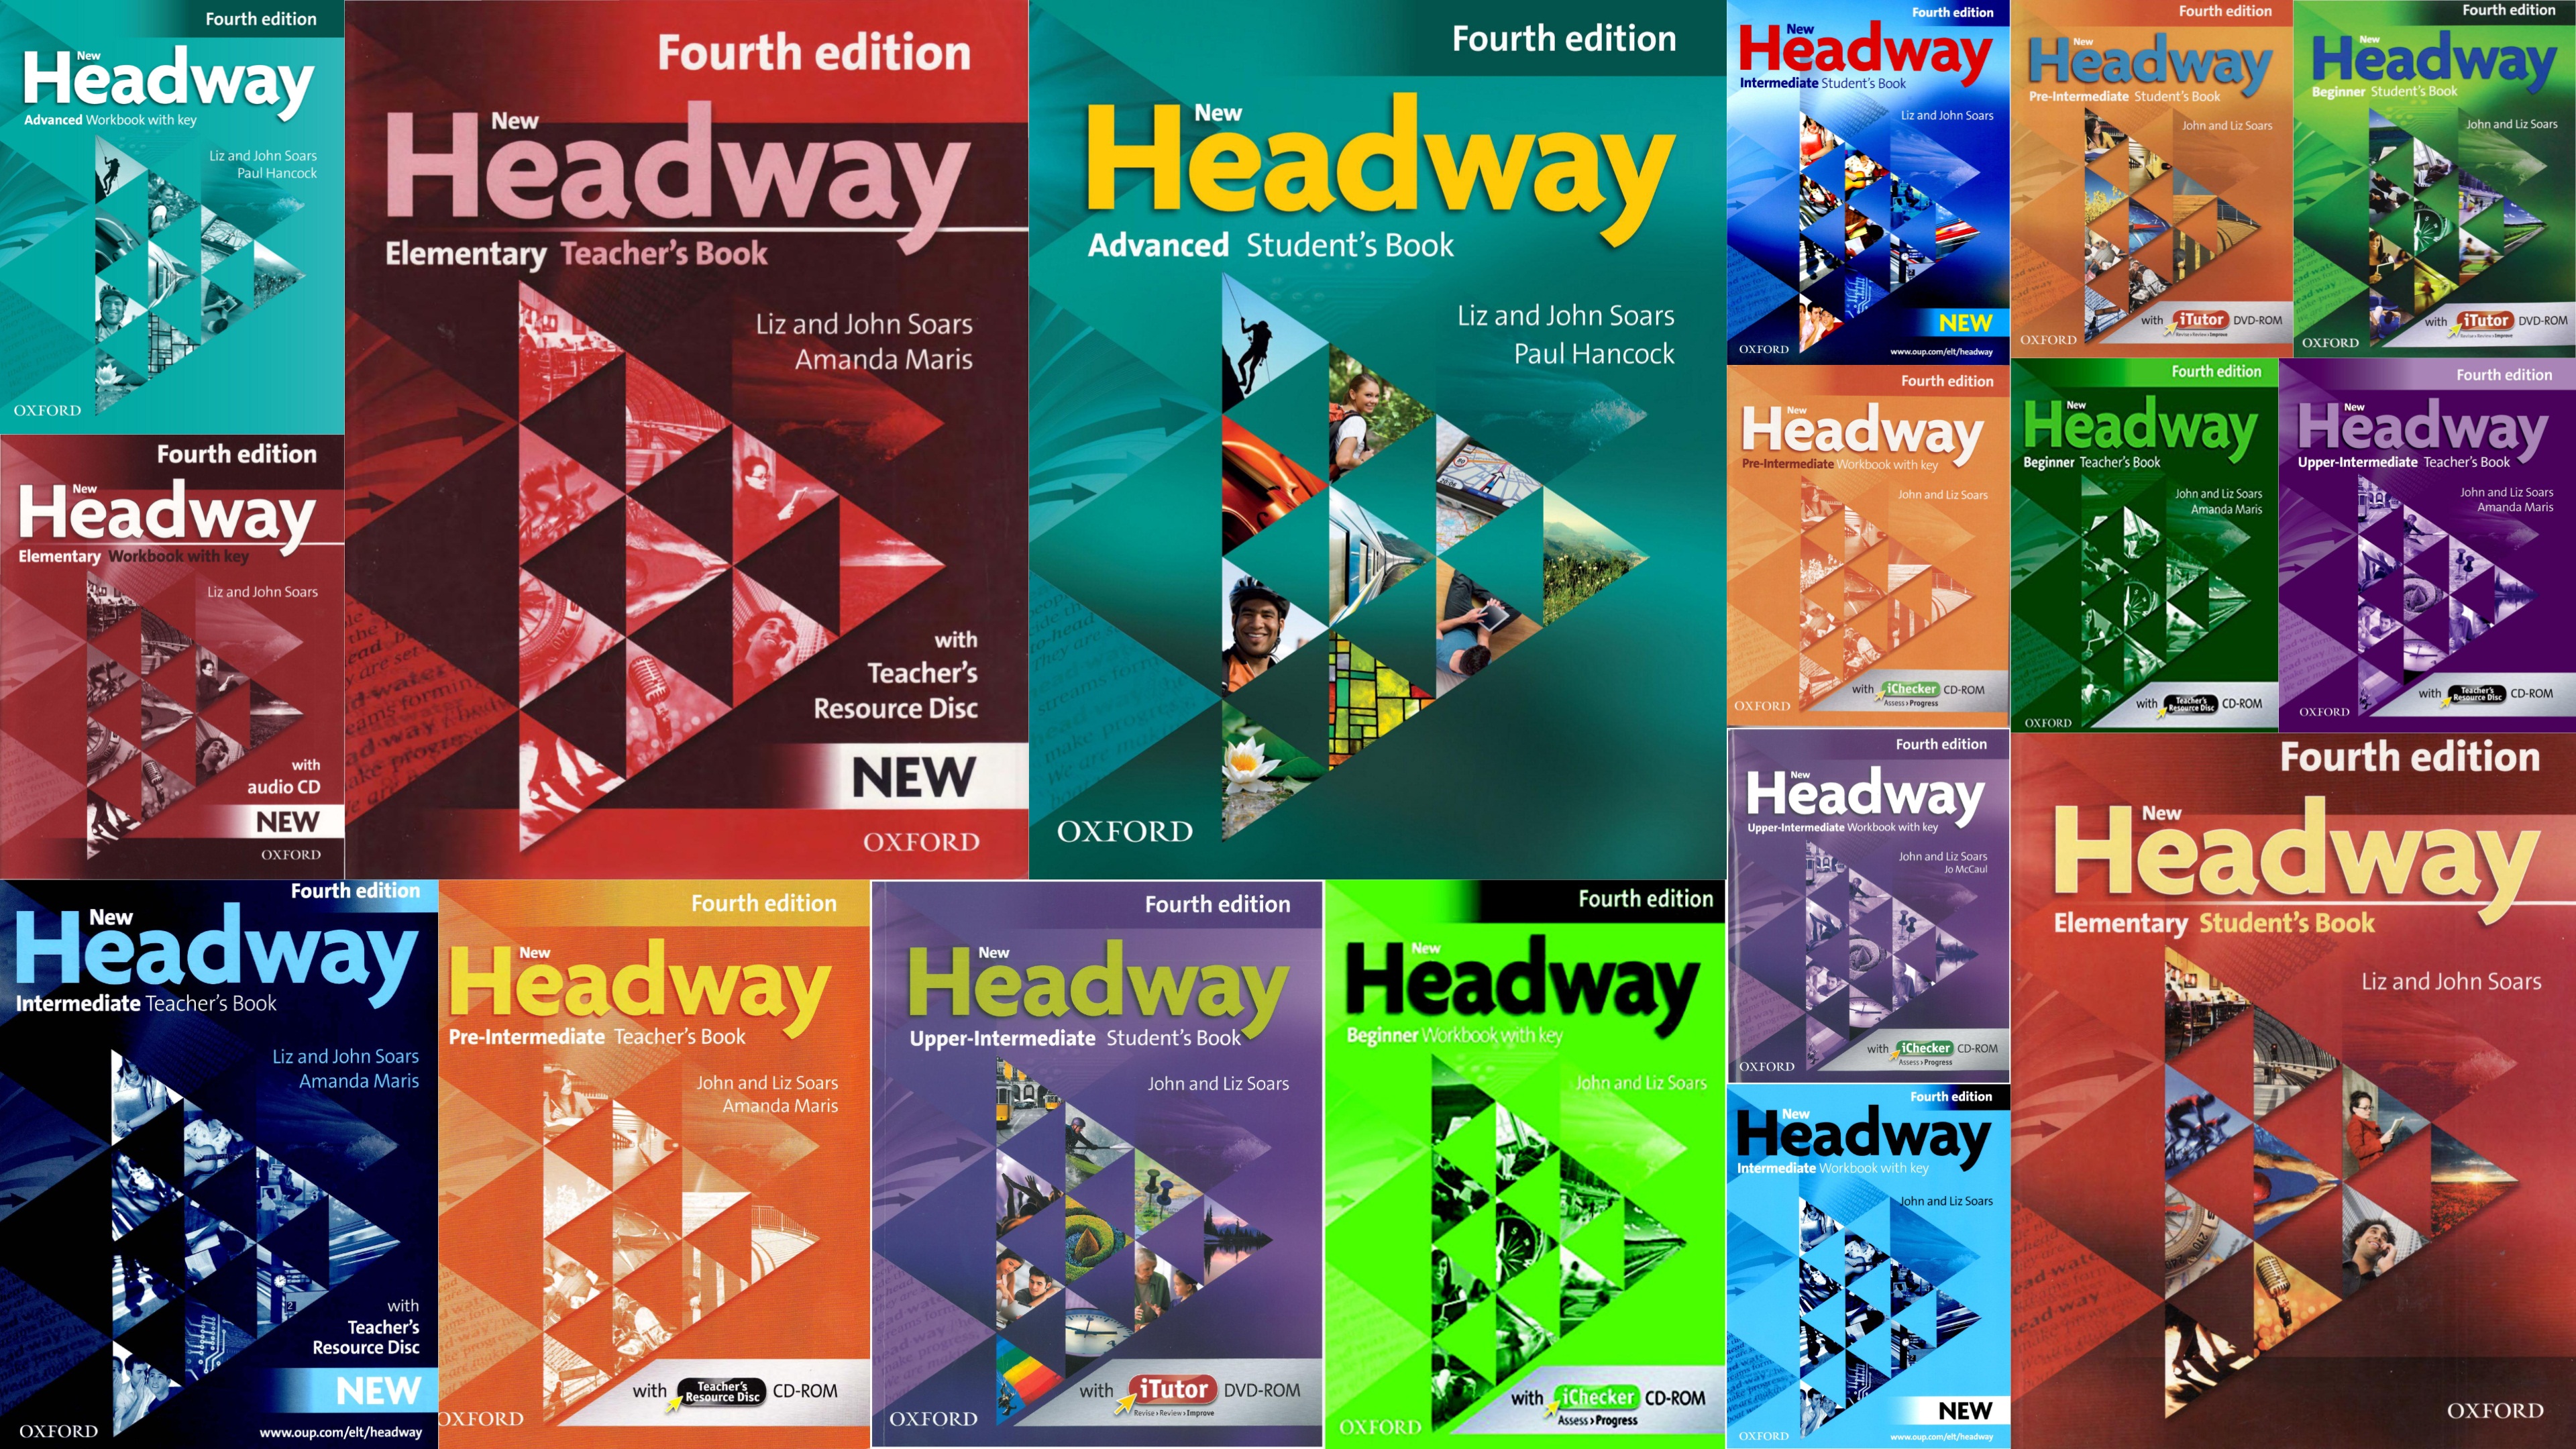 New headway test. New Headway Elementary 4th. New Headway Elementary student's book 4th Edition. New Headway Elementary 4 Edition. New Headway Elementary 5th Edition.